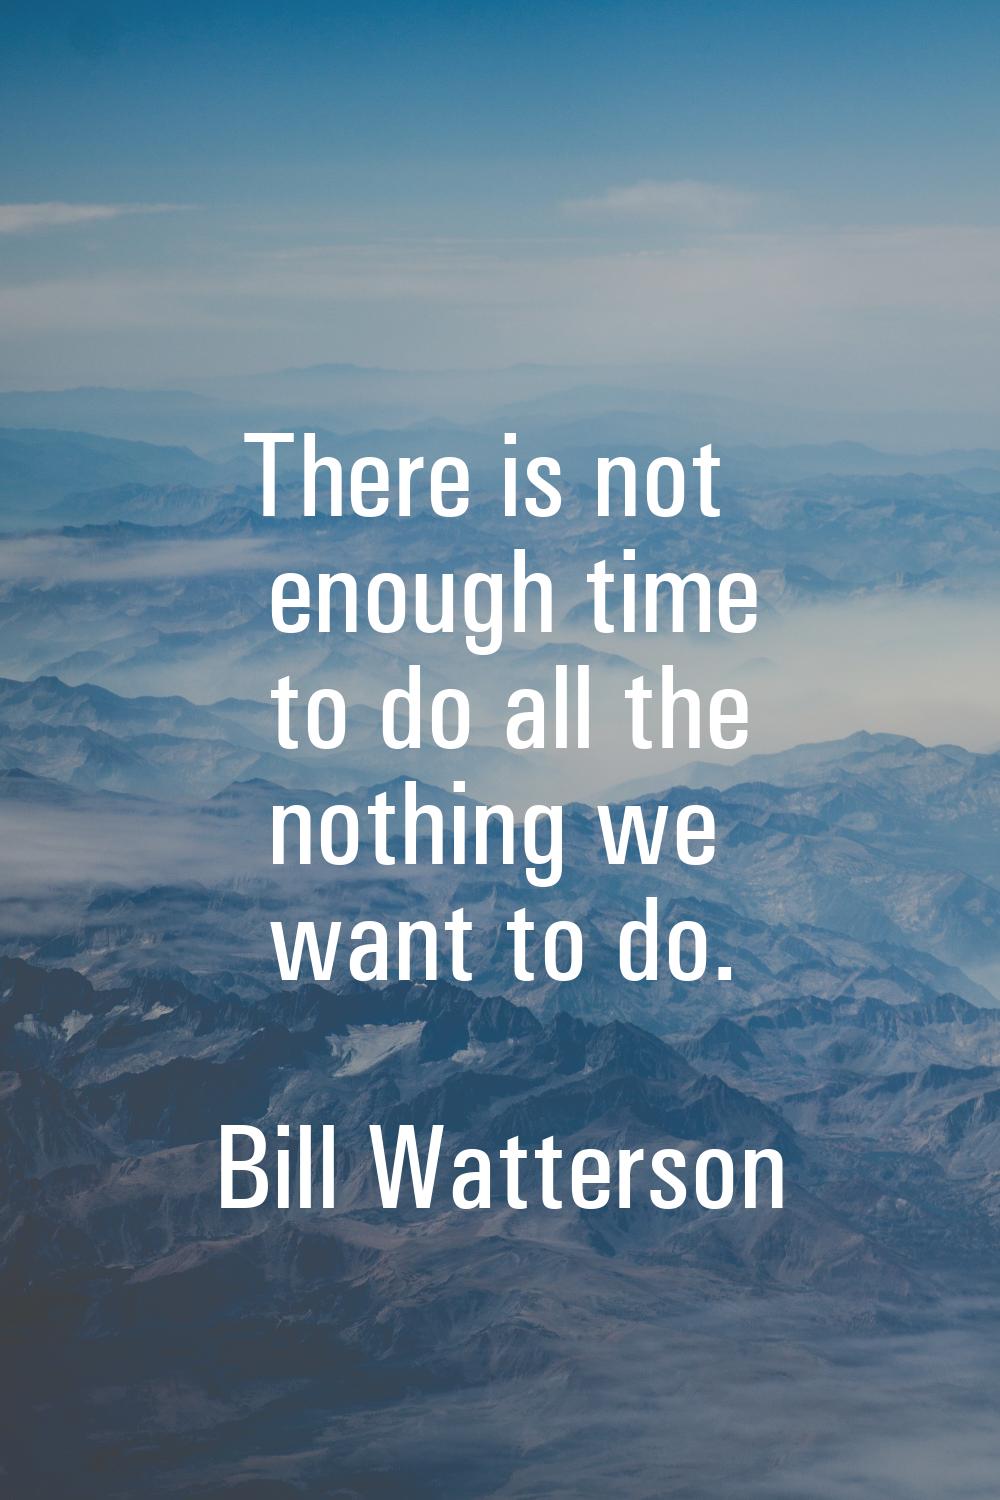 There is not enough time to do all the nothing we want to do.